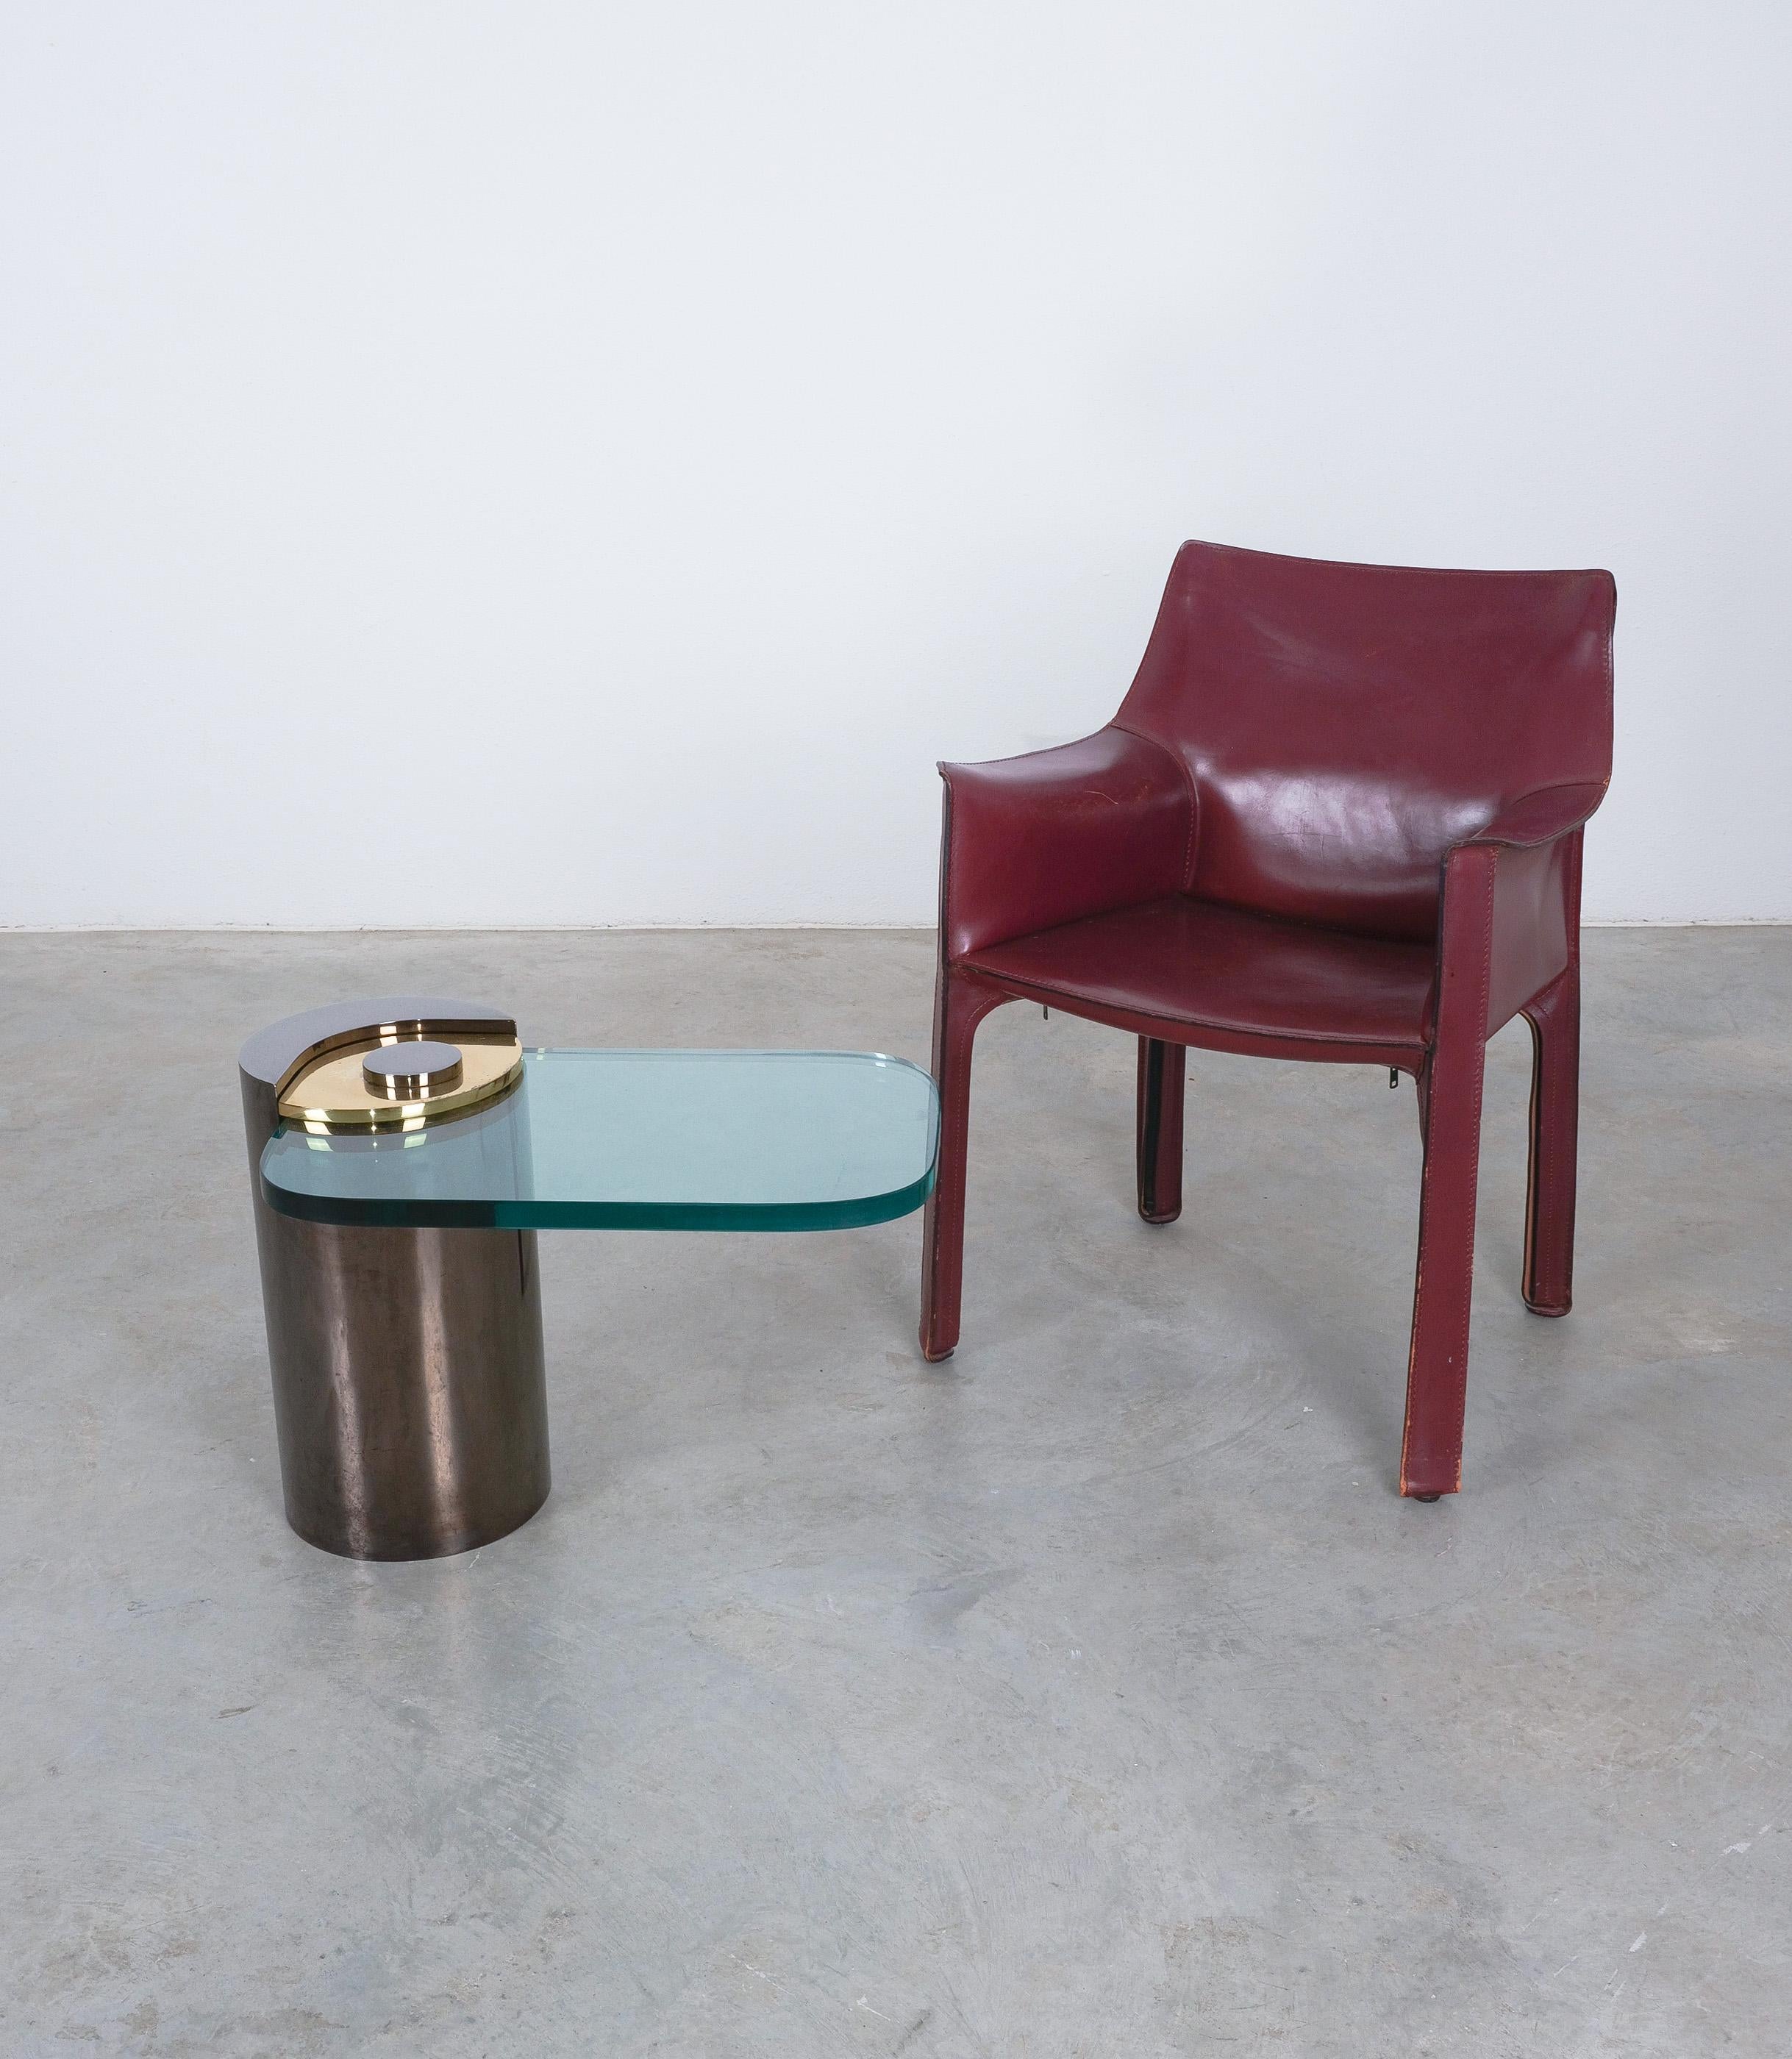 Karl Springer Sculpture Leg Side Table Polished Gunmetal Brass Glass, 1970

Very desirable side table by Karl Springer, 1970 in very good condition. This cantilever table consists of a high polished metal sculptural base which also adds enough